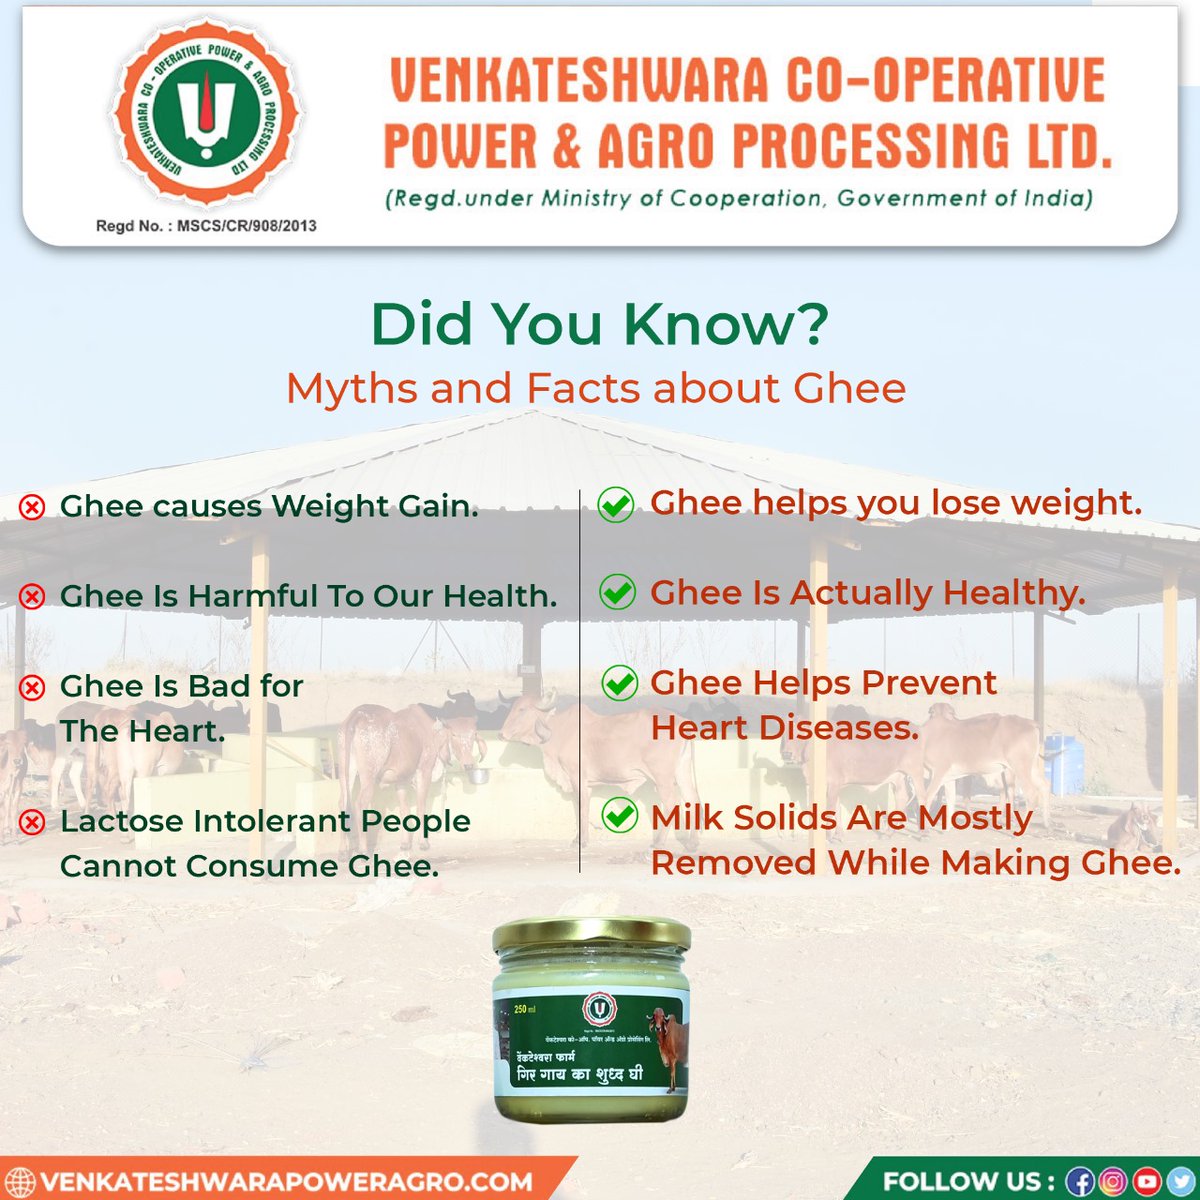 Ghee Myths vs. Facts: Surprising Truths!
Ghee: The Truth Unveiled 🌟 From weight loss to heart health, ghee is full of surprises! Find out the facts and forget the myths
#venkateshwaracooperative #powerandagroprocessing #sahakarsesamridhi #healthfacts #didyouknow #nutritionmyths